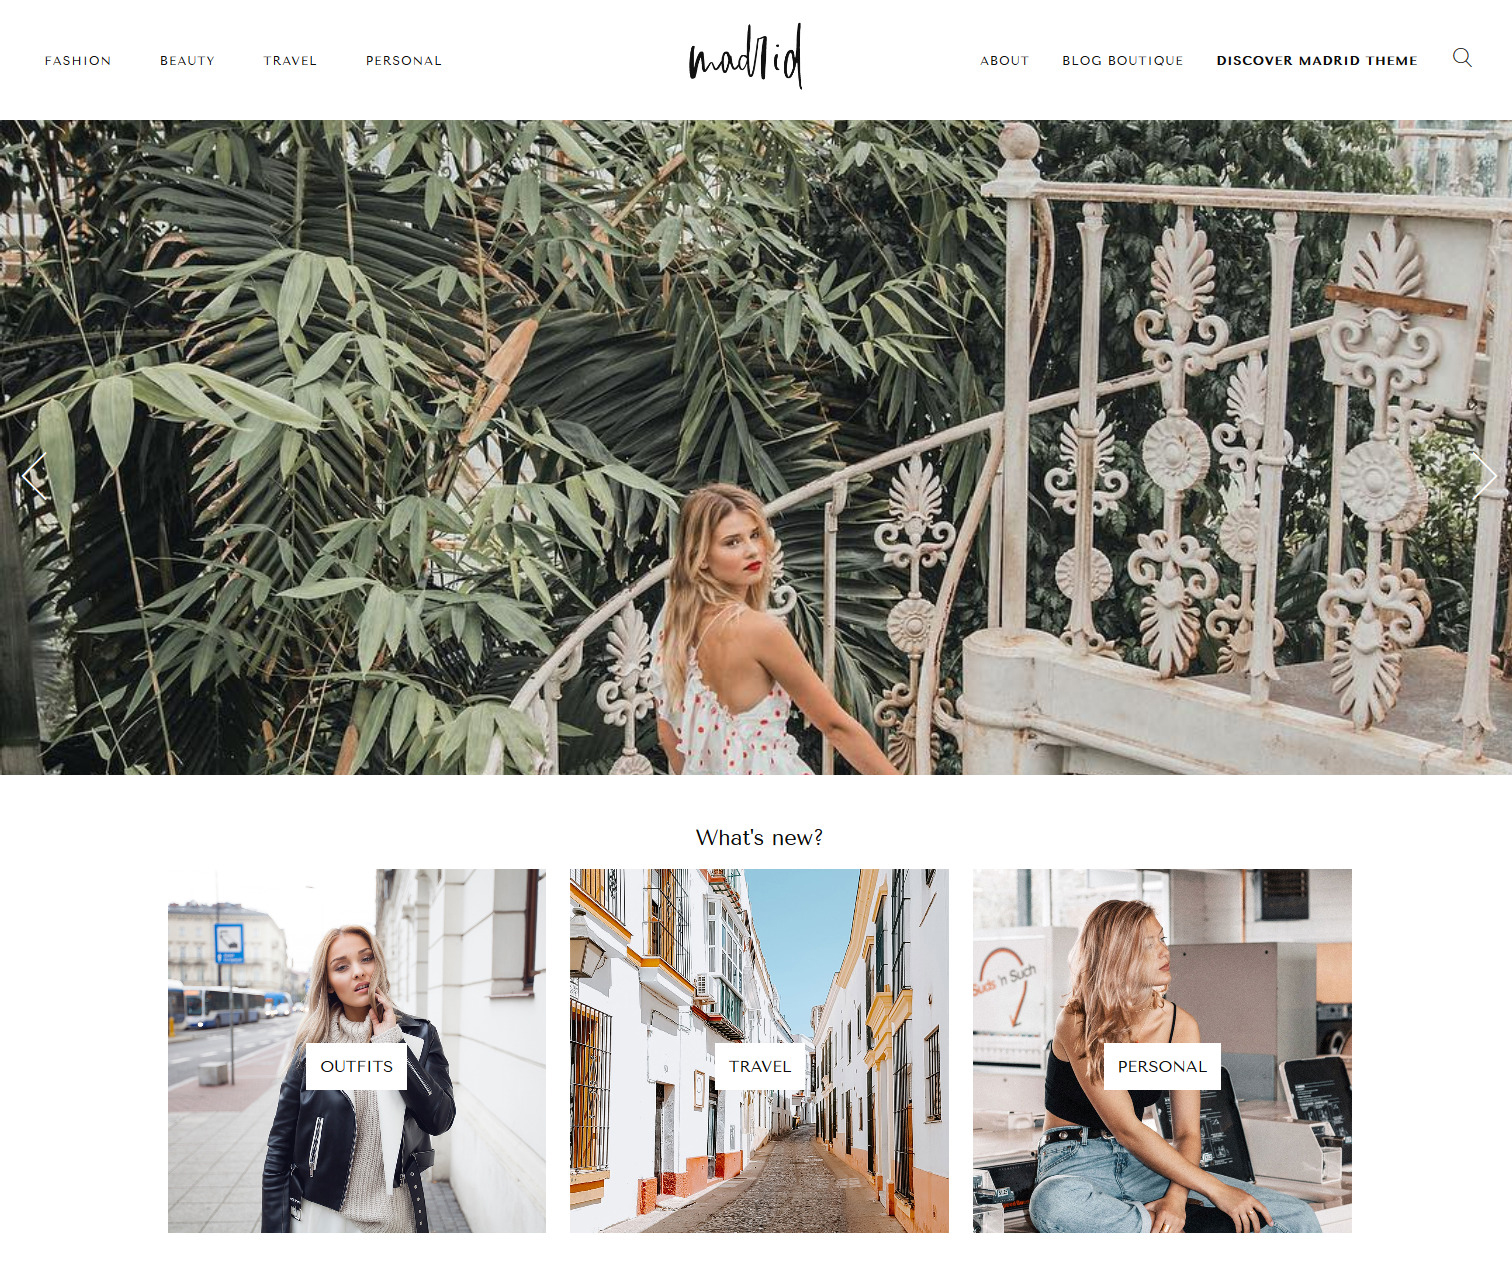 Madrid - A WordPress Theme for Fashion Bloggers - easy to install and customize - Shopping Affiliate Features - Make Money with Blogging and this theme is easy